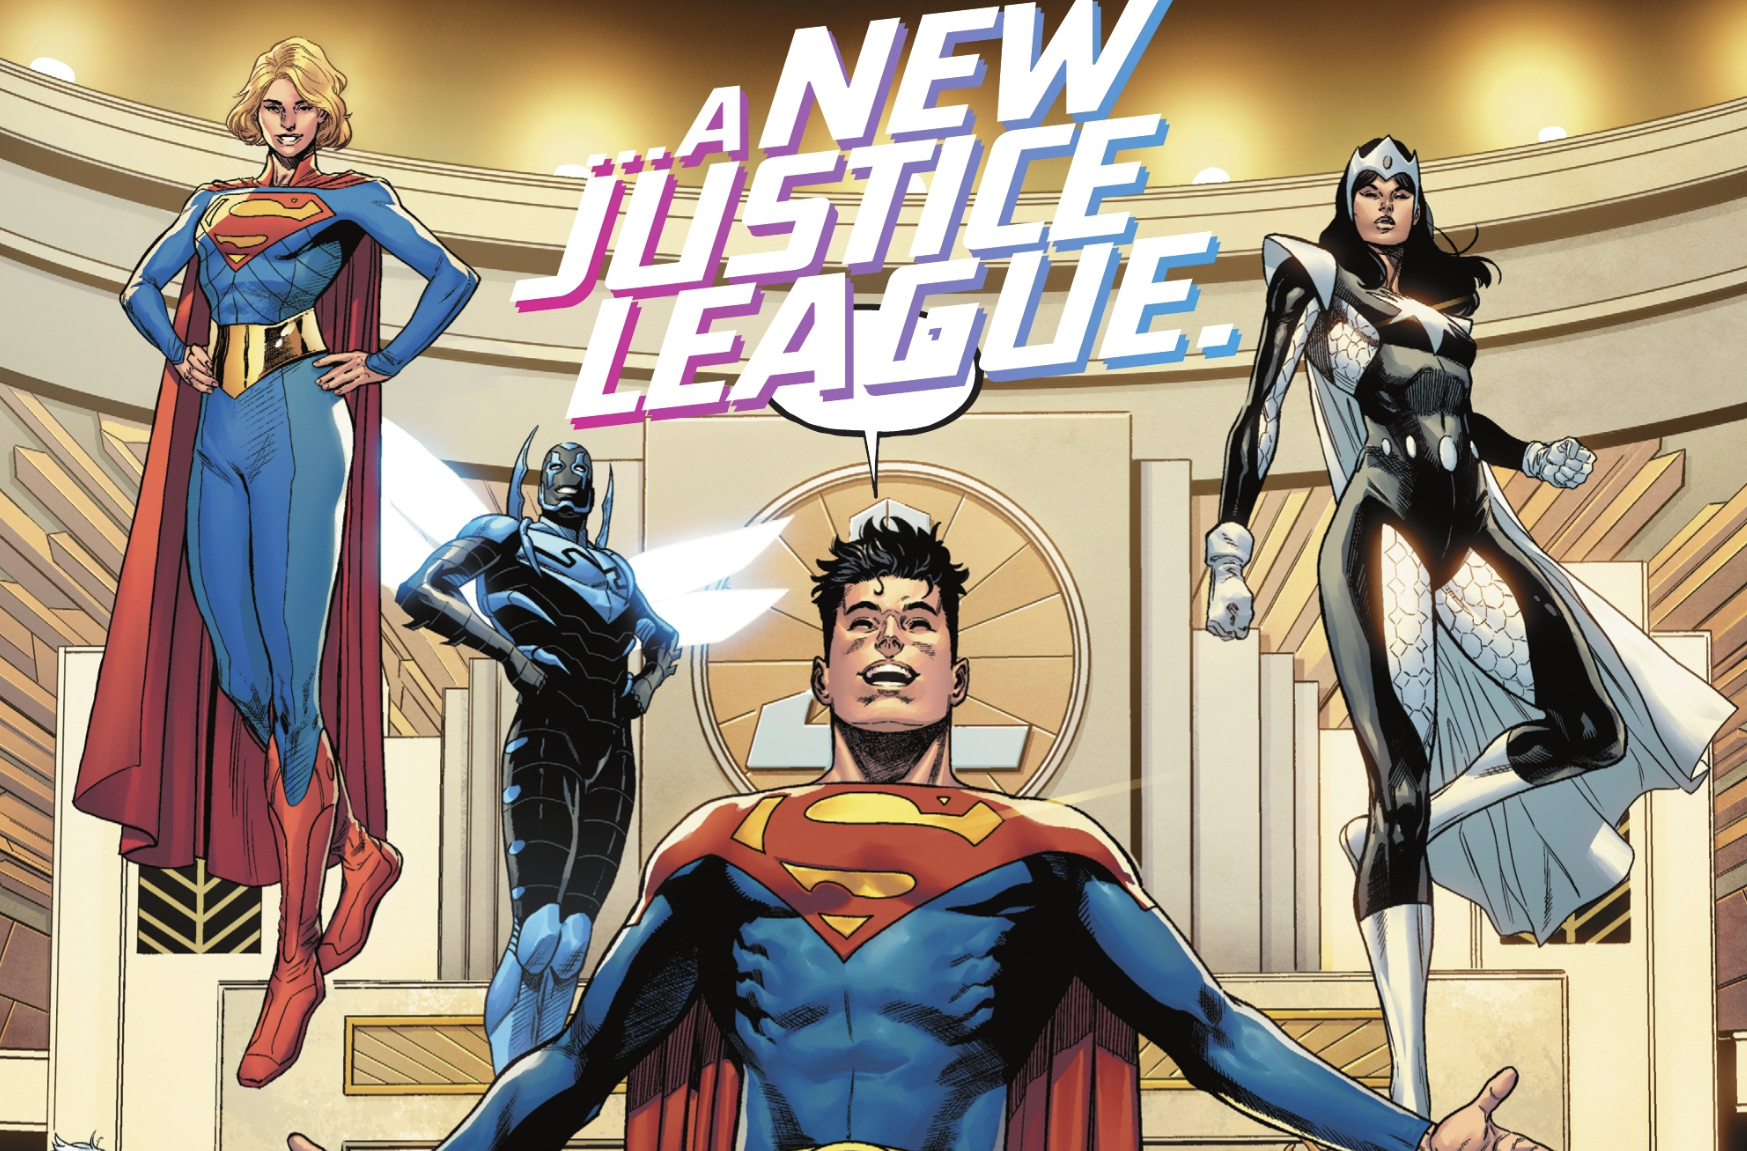 “A new Justice Leauge,” declares Jon Kent/Superman as he gestures joyously to the superheroes around him, Supergirl, Blue Beetle/Jamie Reyes, and Doctor Light in Dark Crisis #1 (2022).